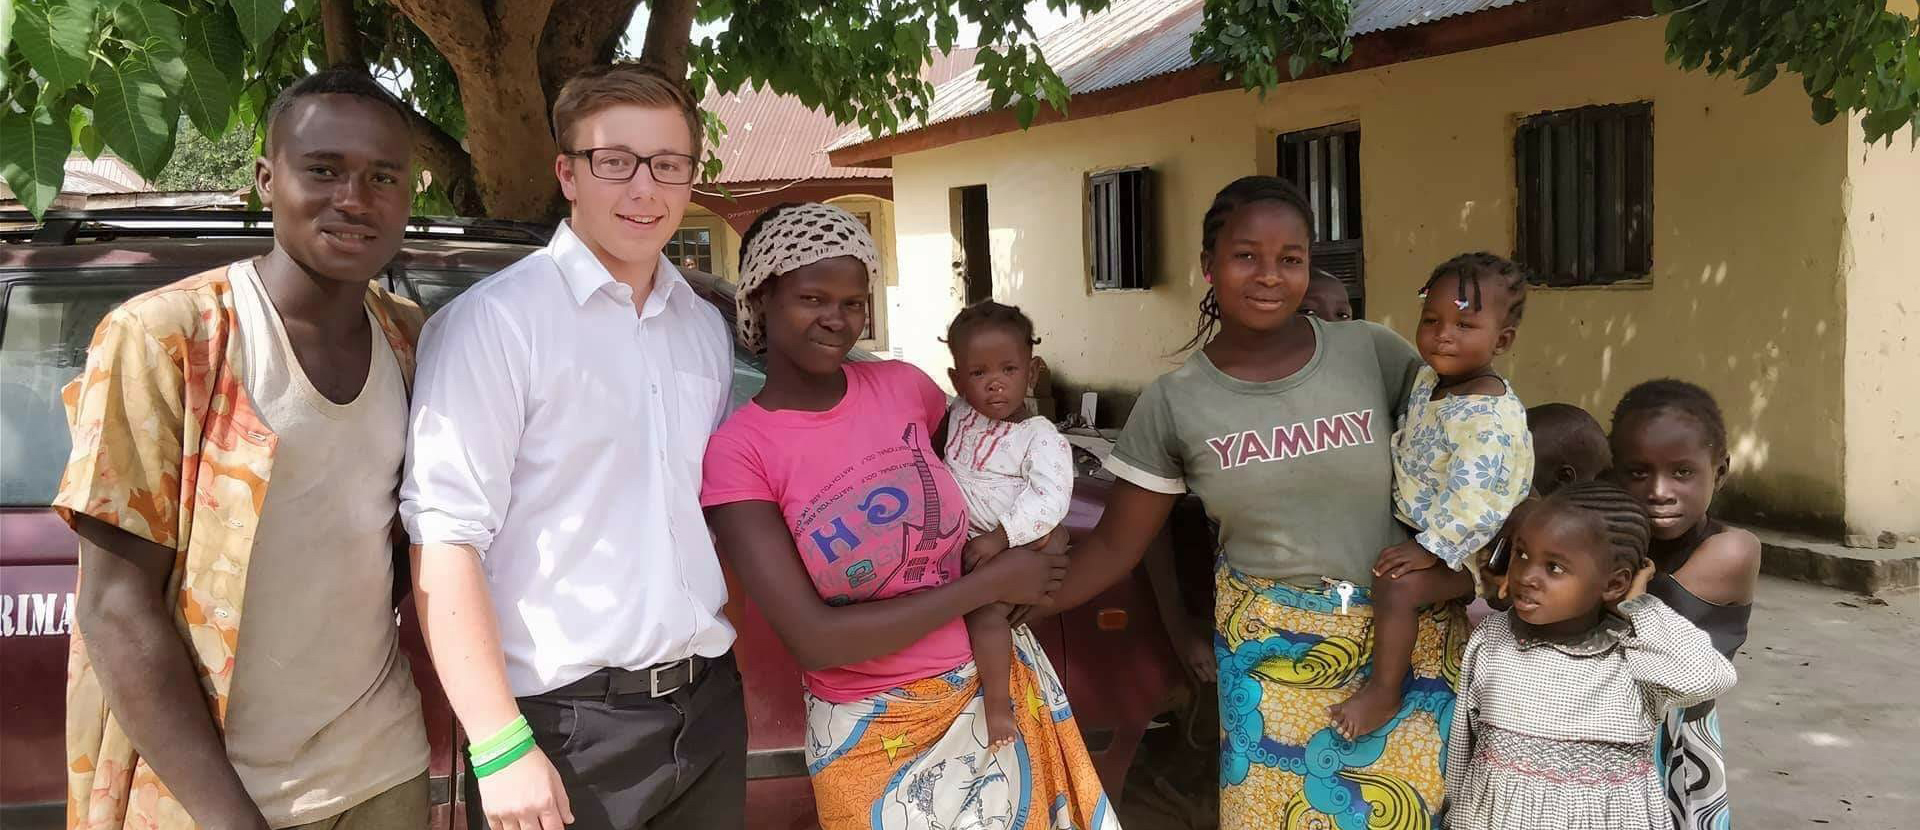 Picture of Seth Thomas with some members of the Kaduna community